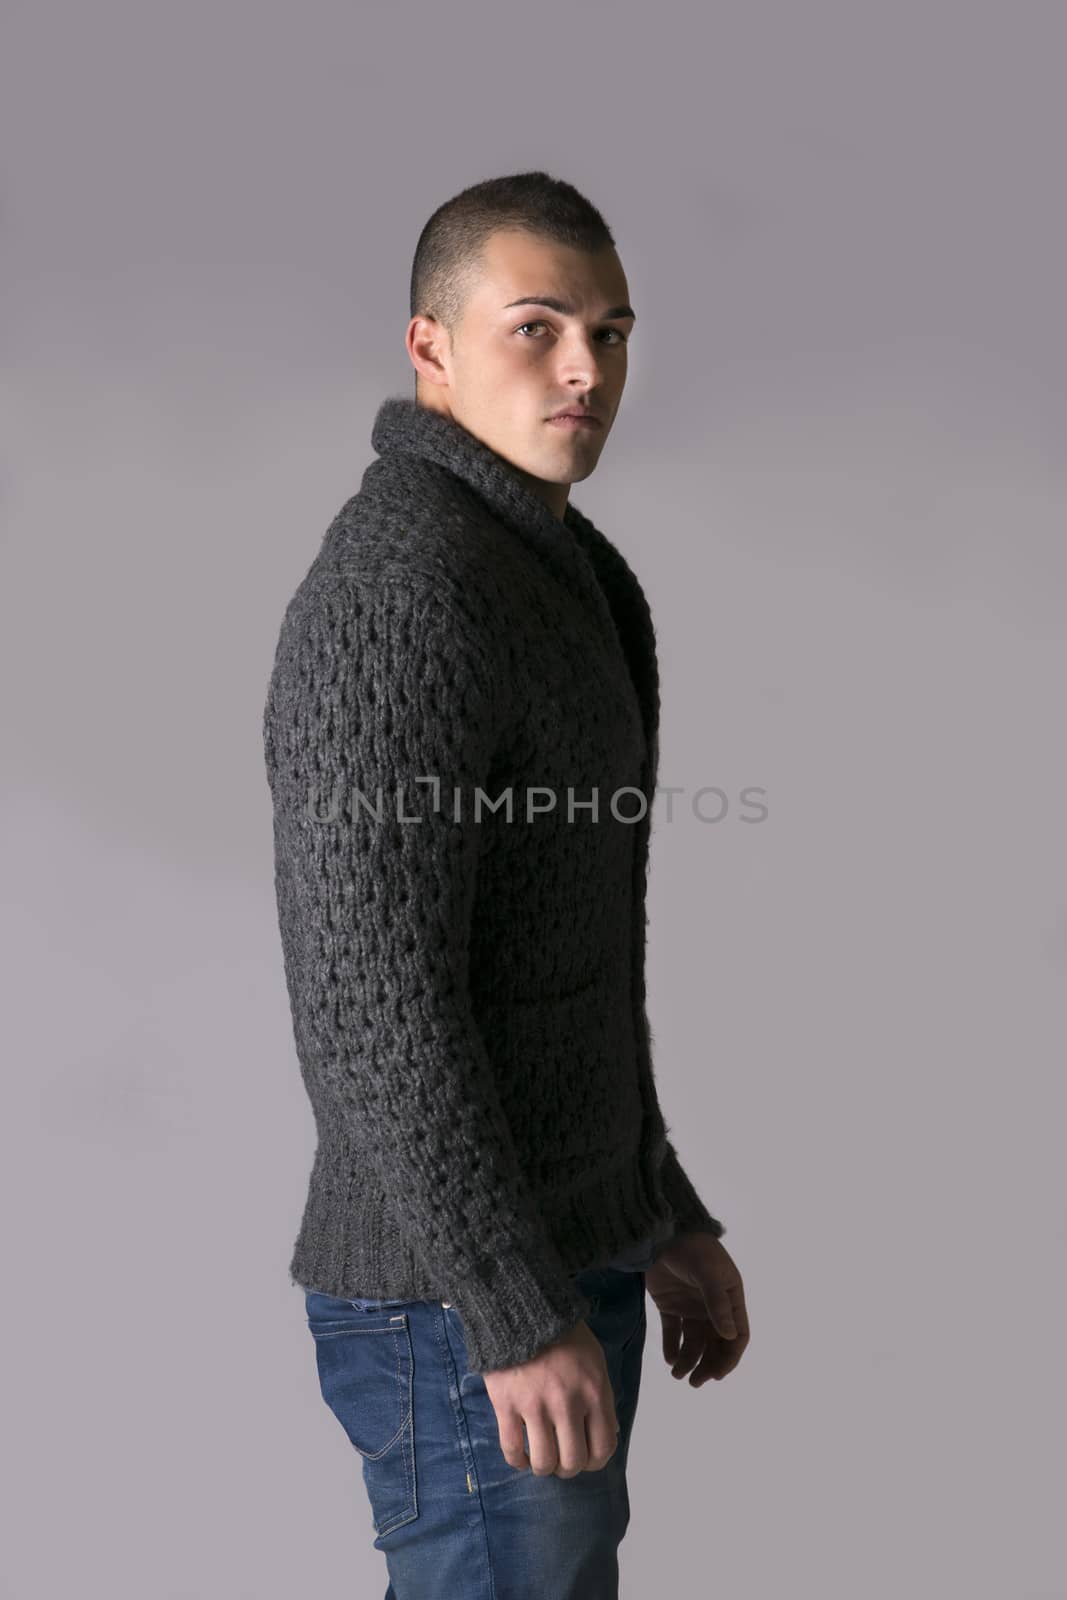 Attractive young man with wool sweater and jeans by artofphoto